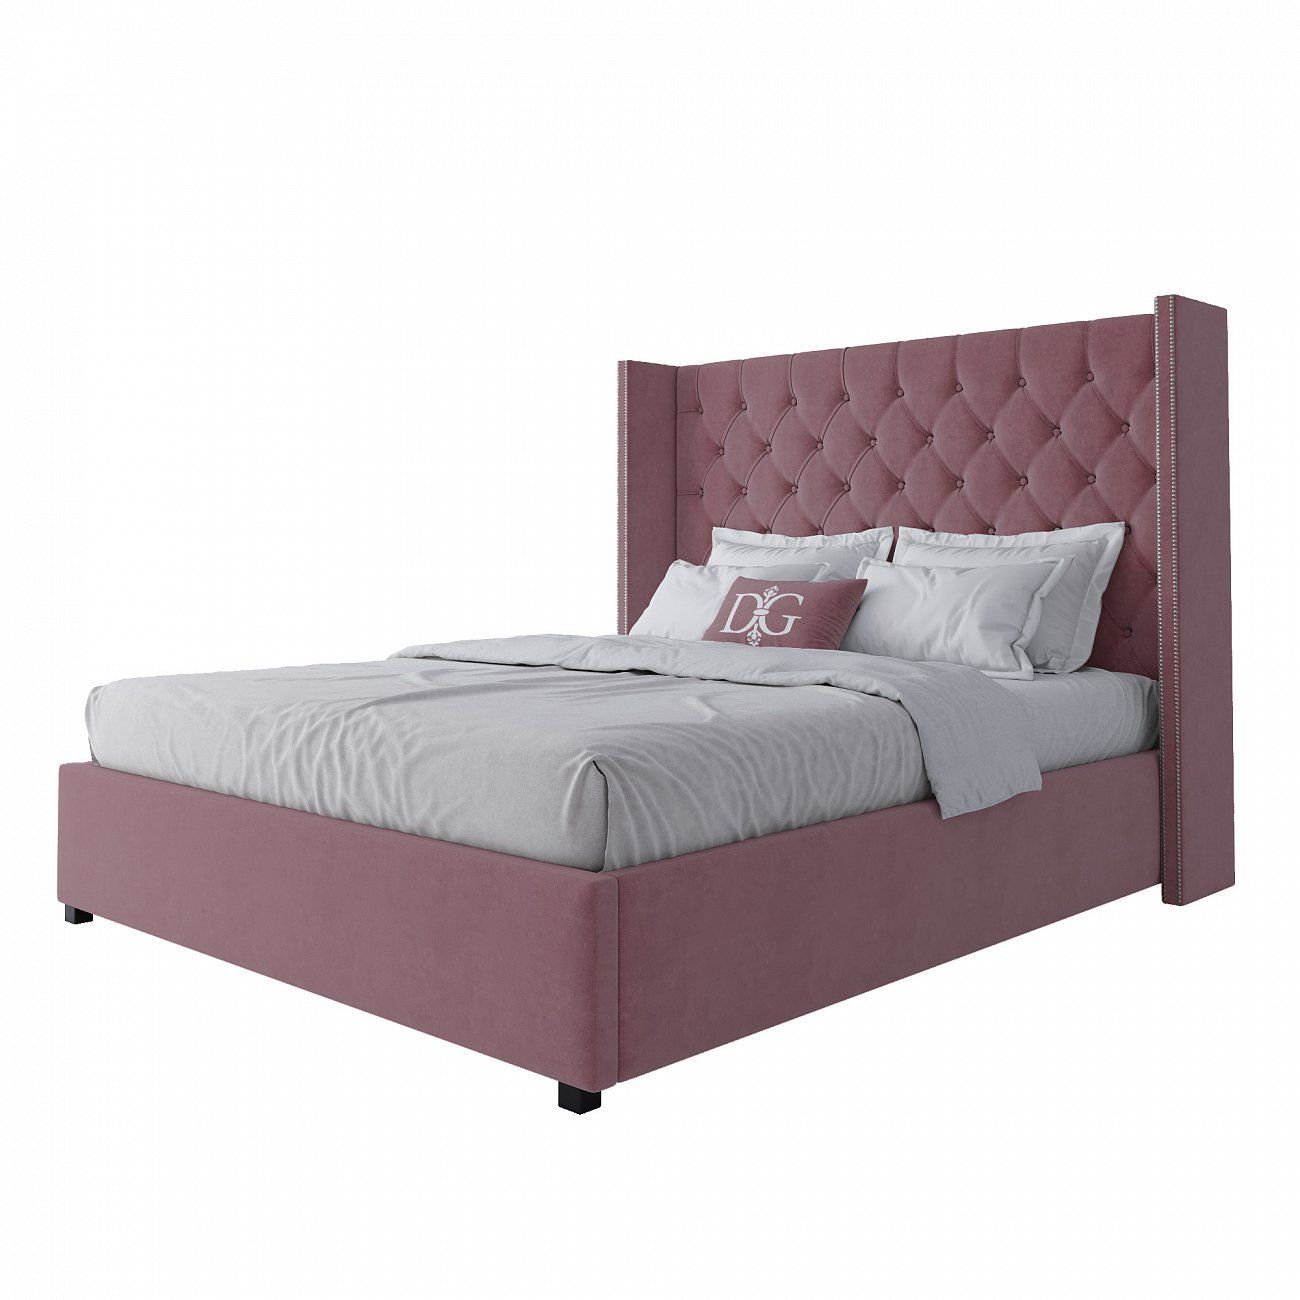 Double bed with upholstered headboard 160x200 cm Dusty Rose Wing